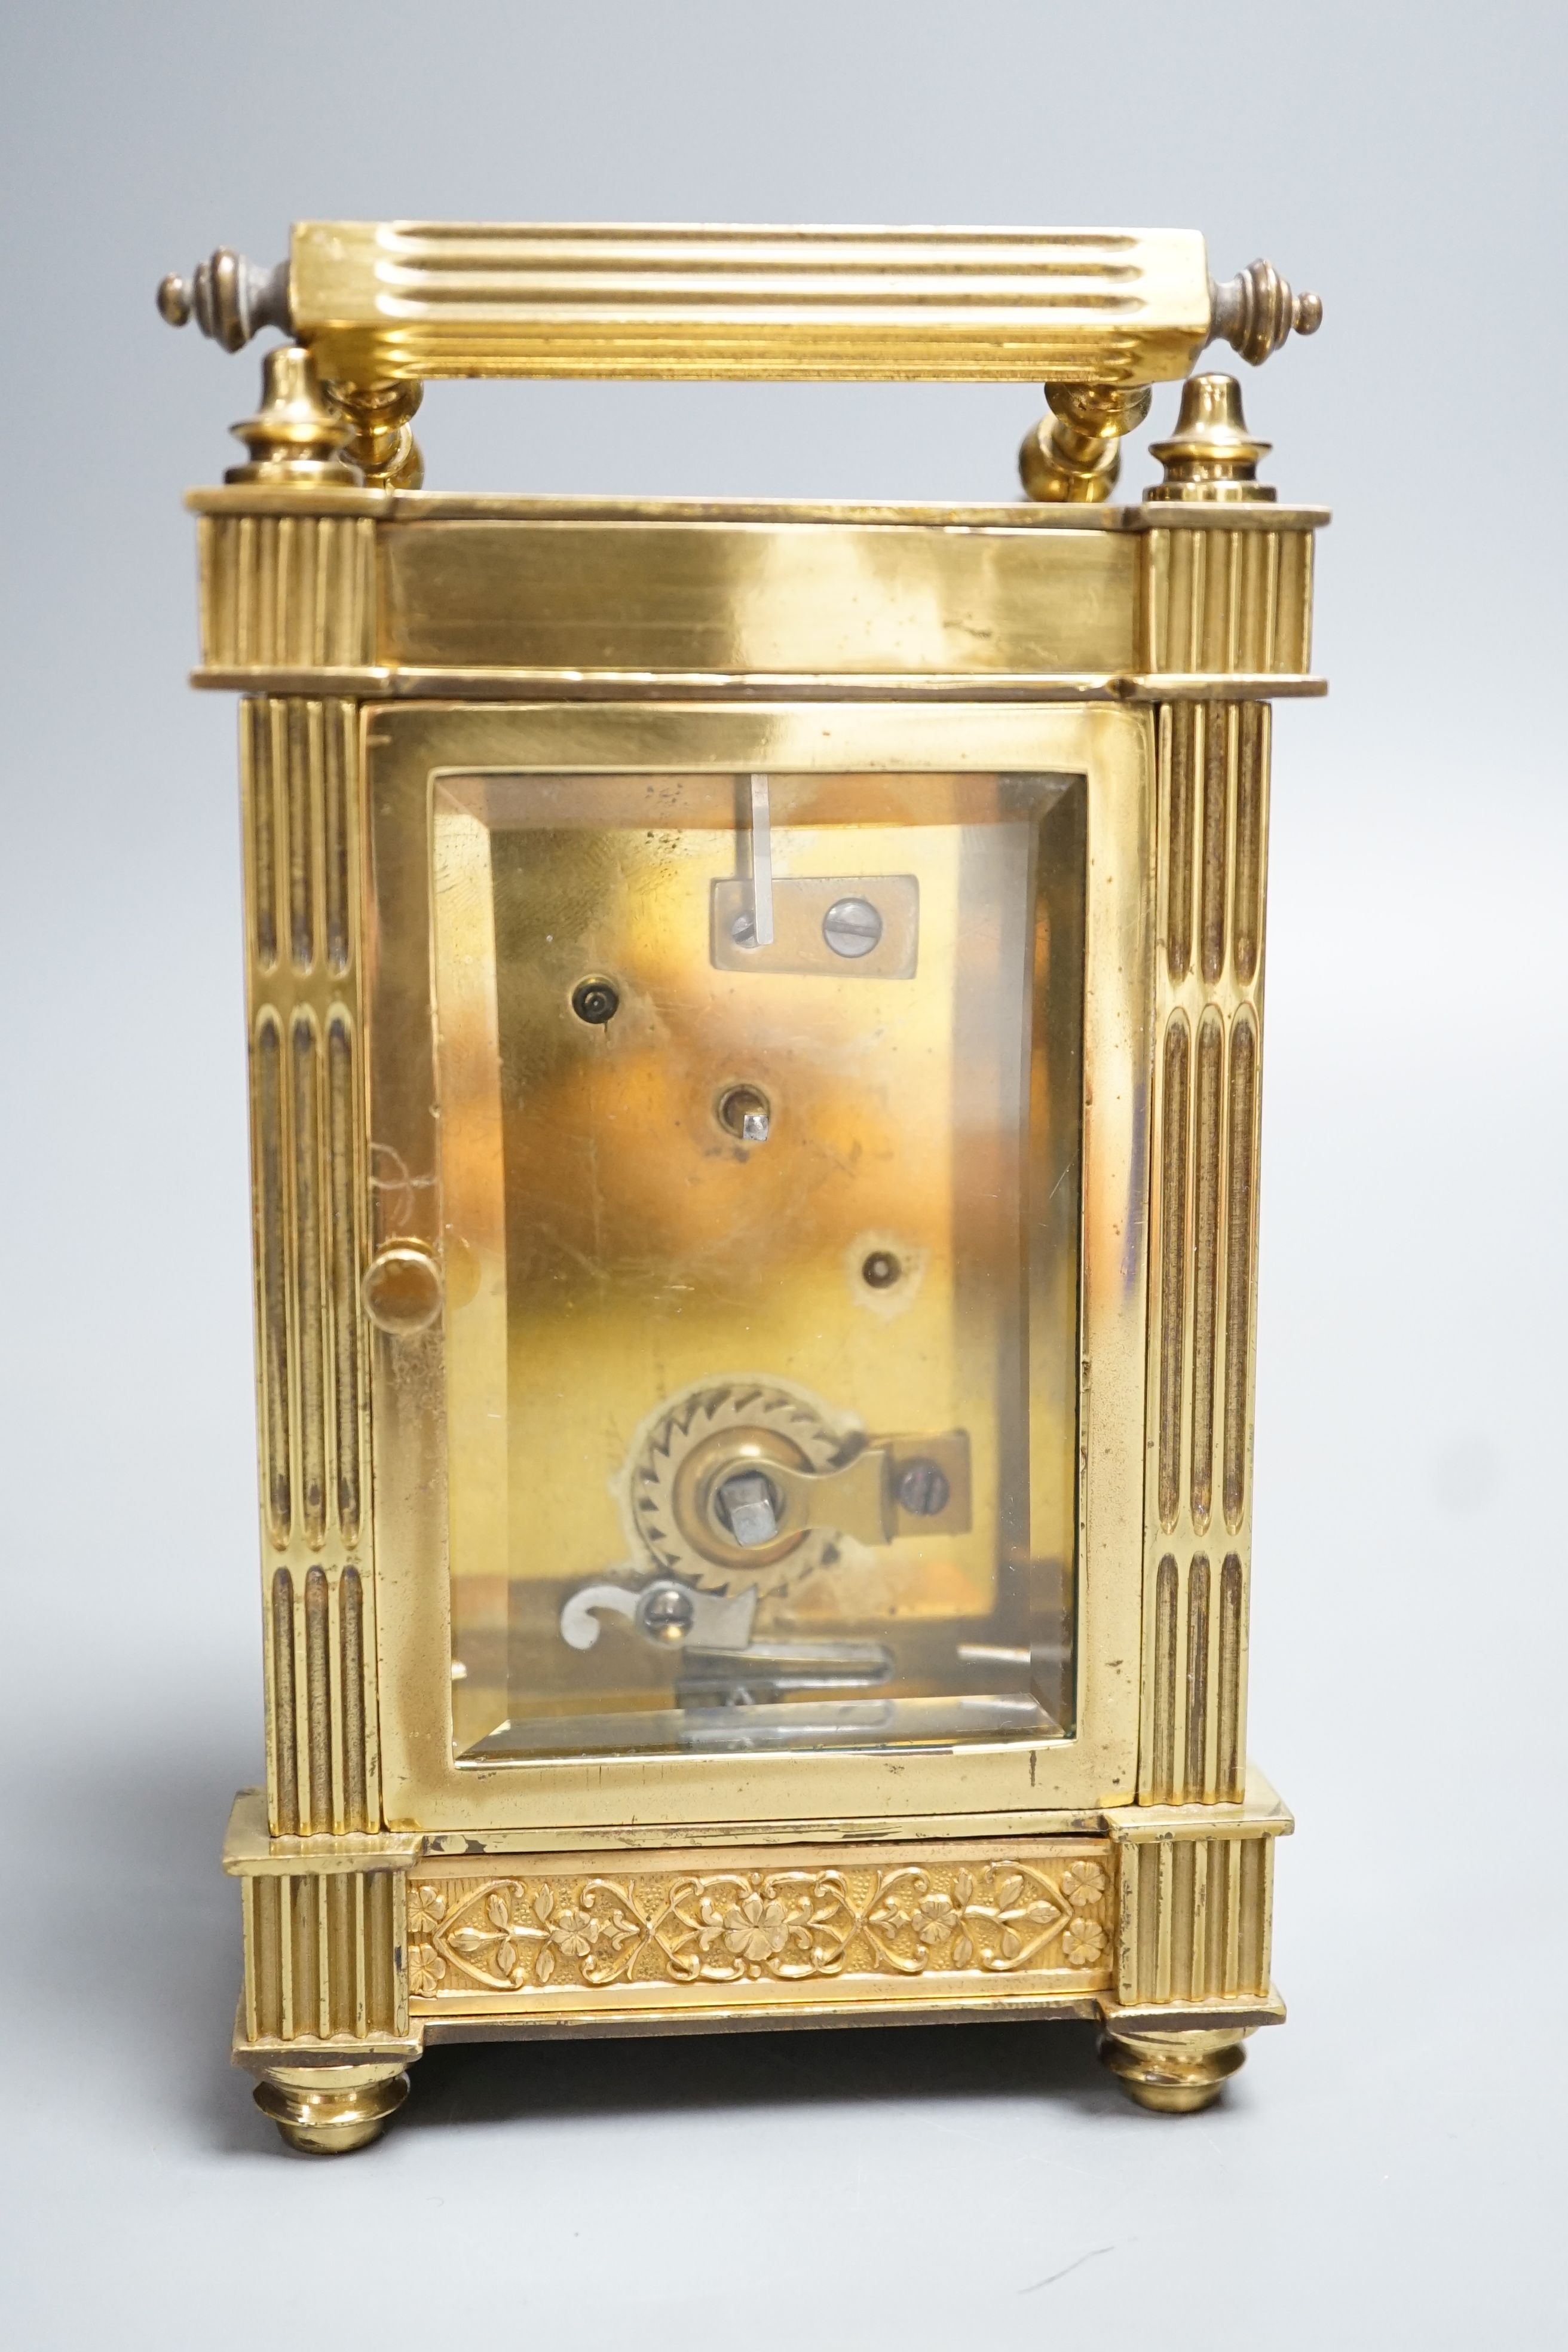 An early 20th century French brass carriage timepiece with fretted dial. 15.5cm